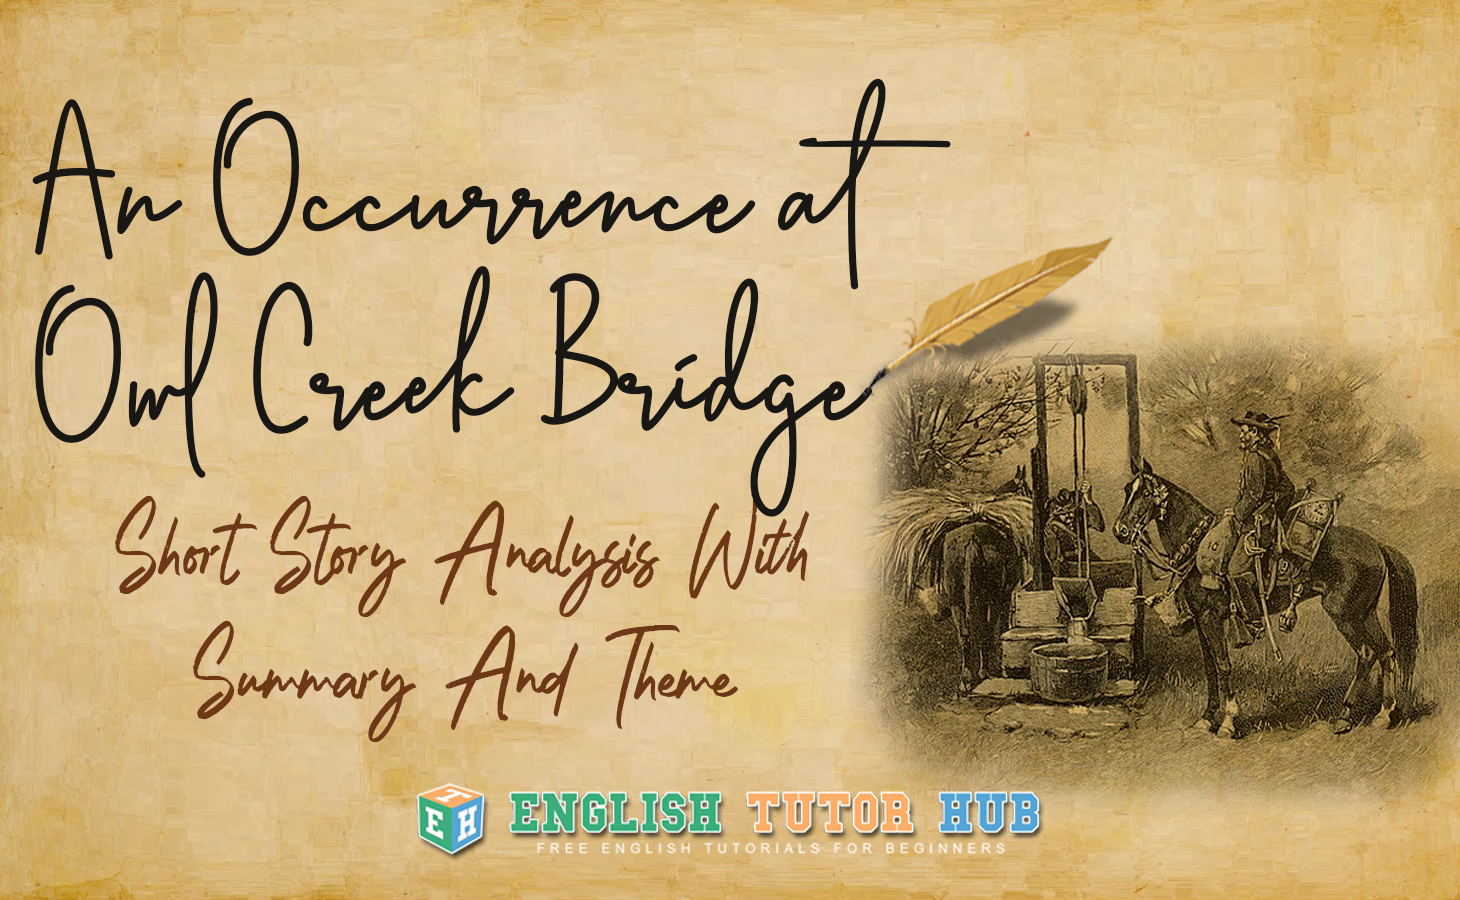 An Occurrence at Owl Creek Bridge Short Story Analysis With Summary And Theme